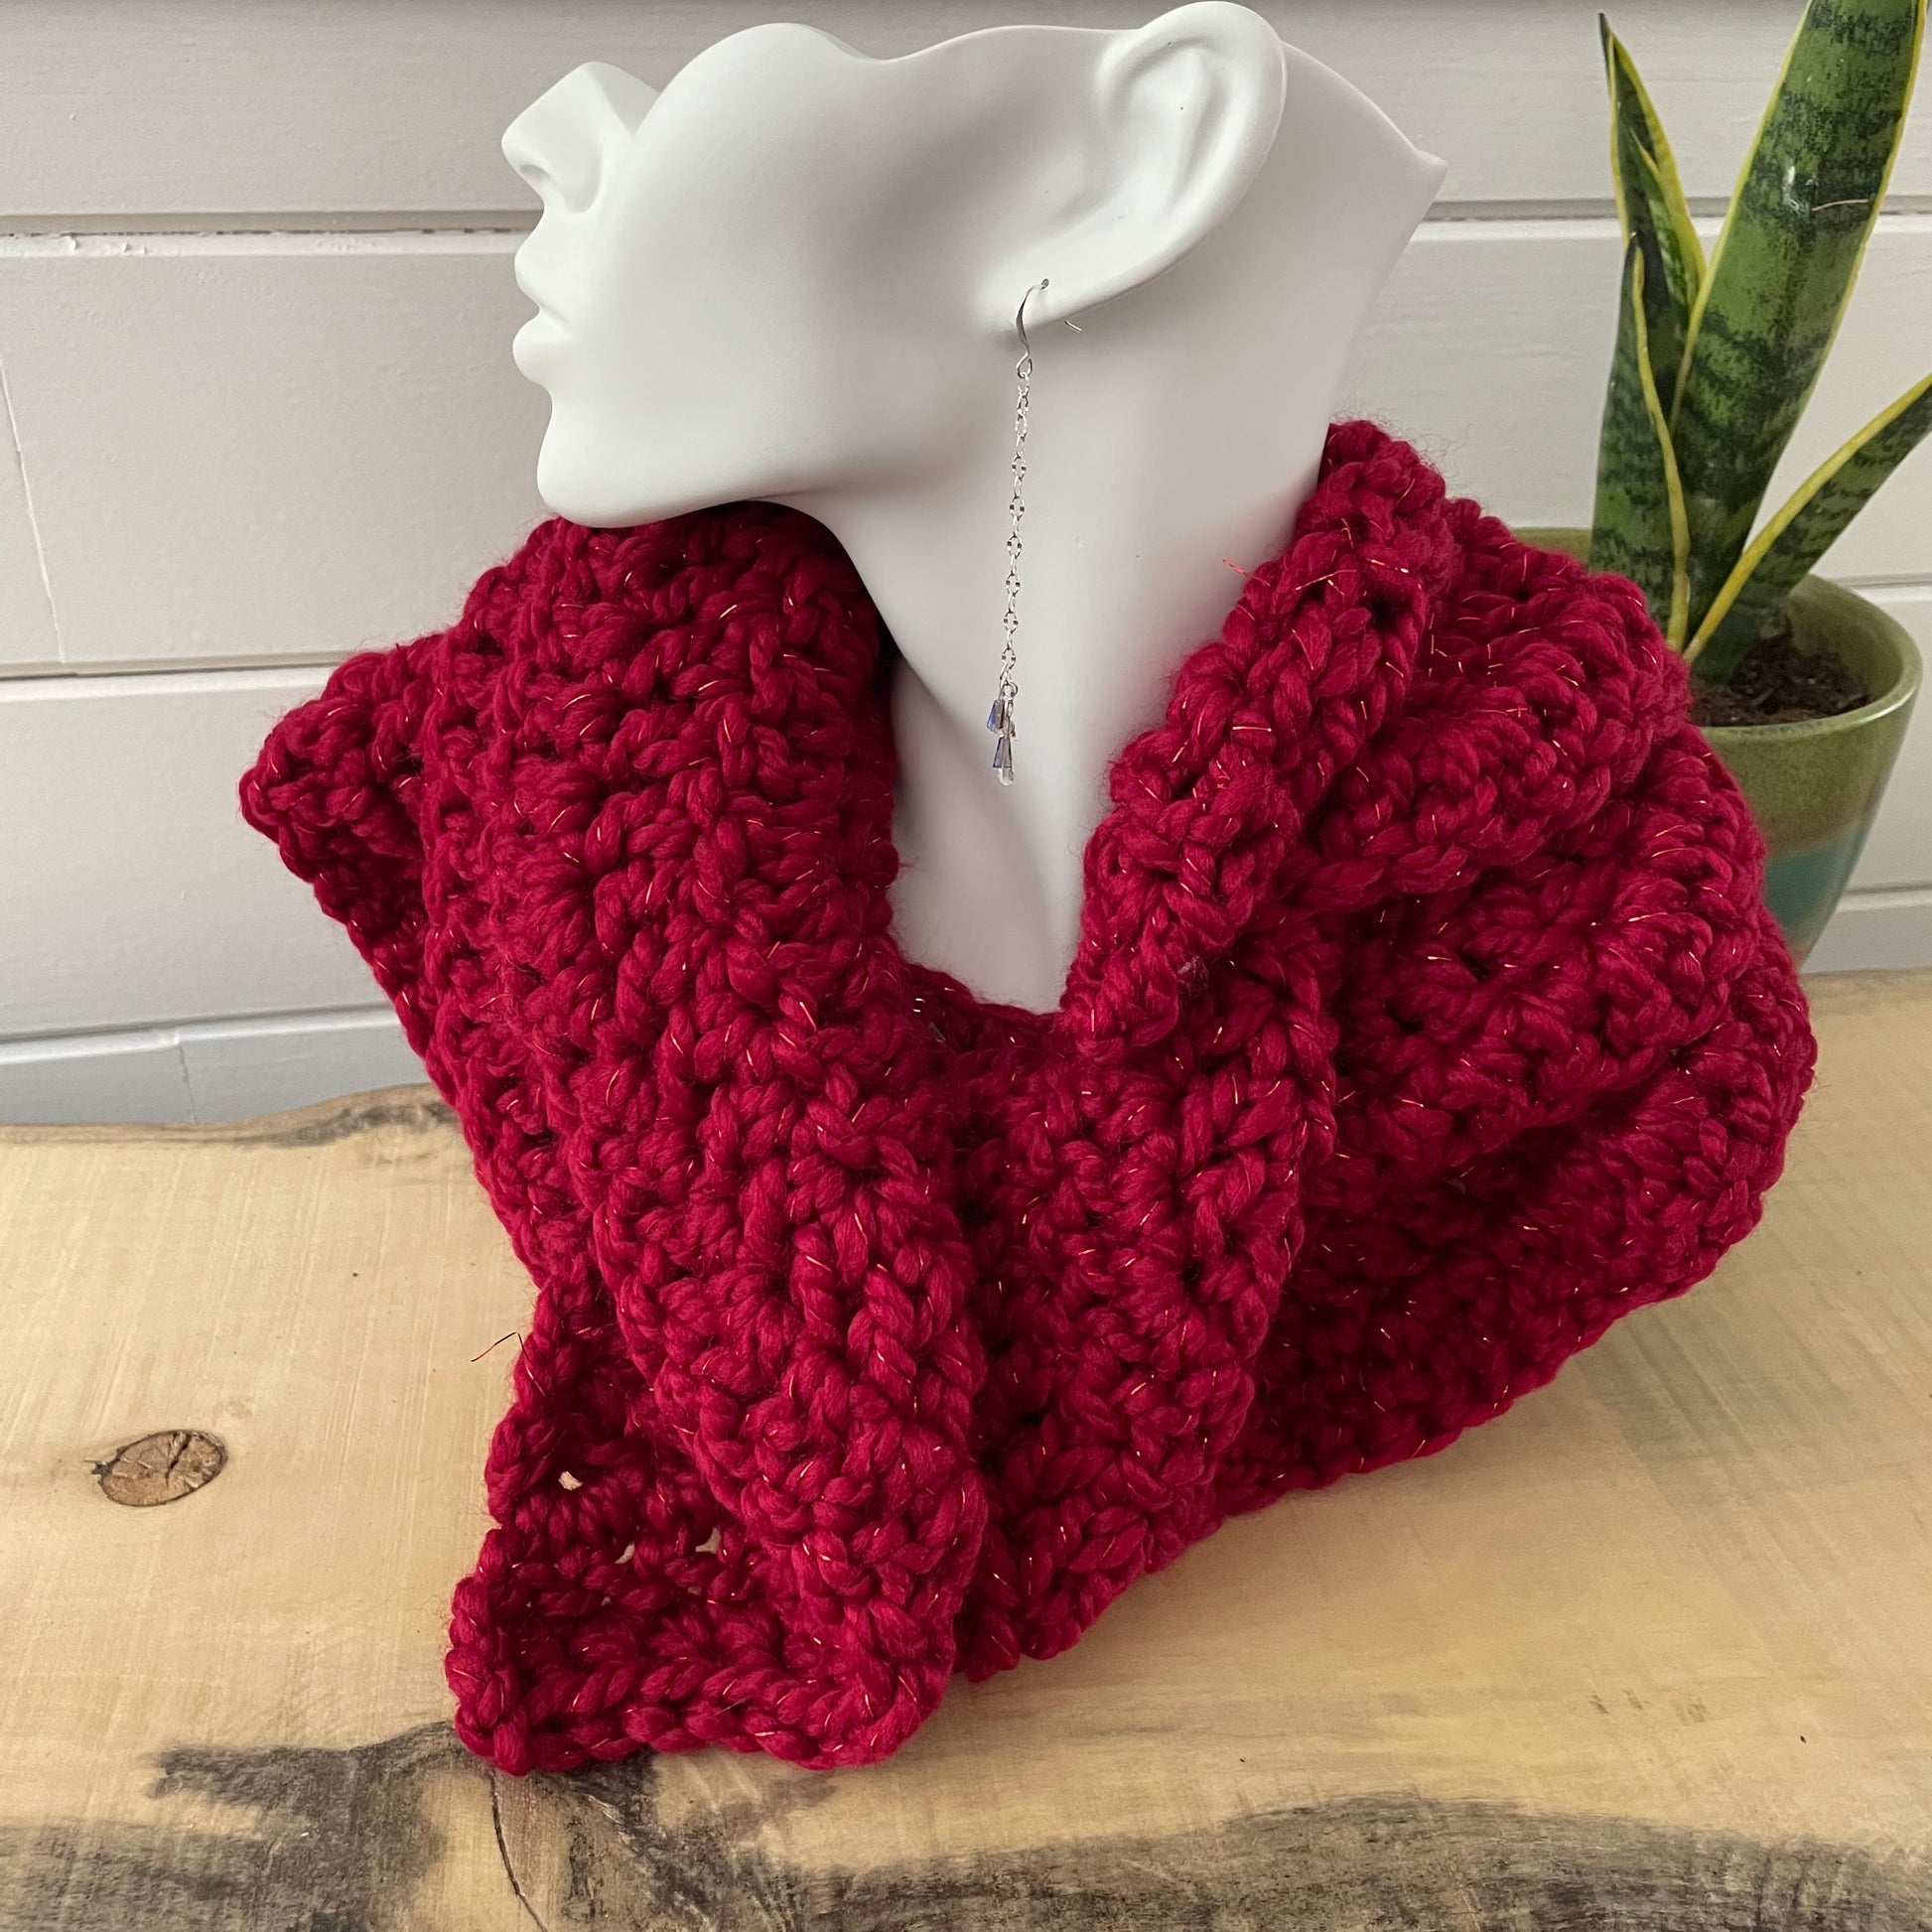 Extra Warm Crochet Knit Chunky Ruffled Scarf Hand Crafted Marbled Red Wine Maroon Metallic Accent Flirty Fall Winter--displayed on solid white mannequin